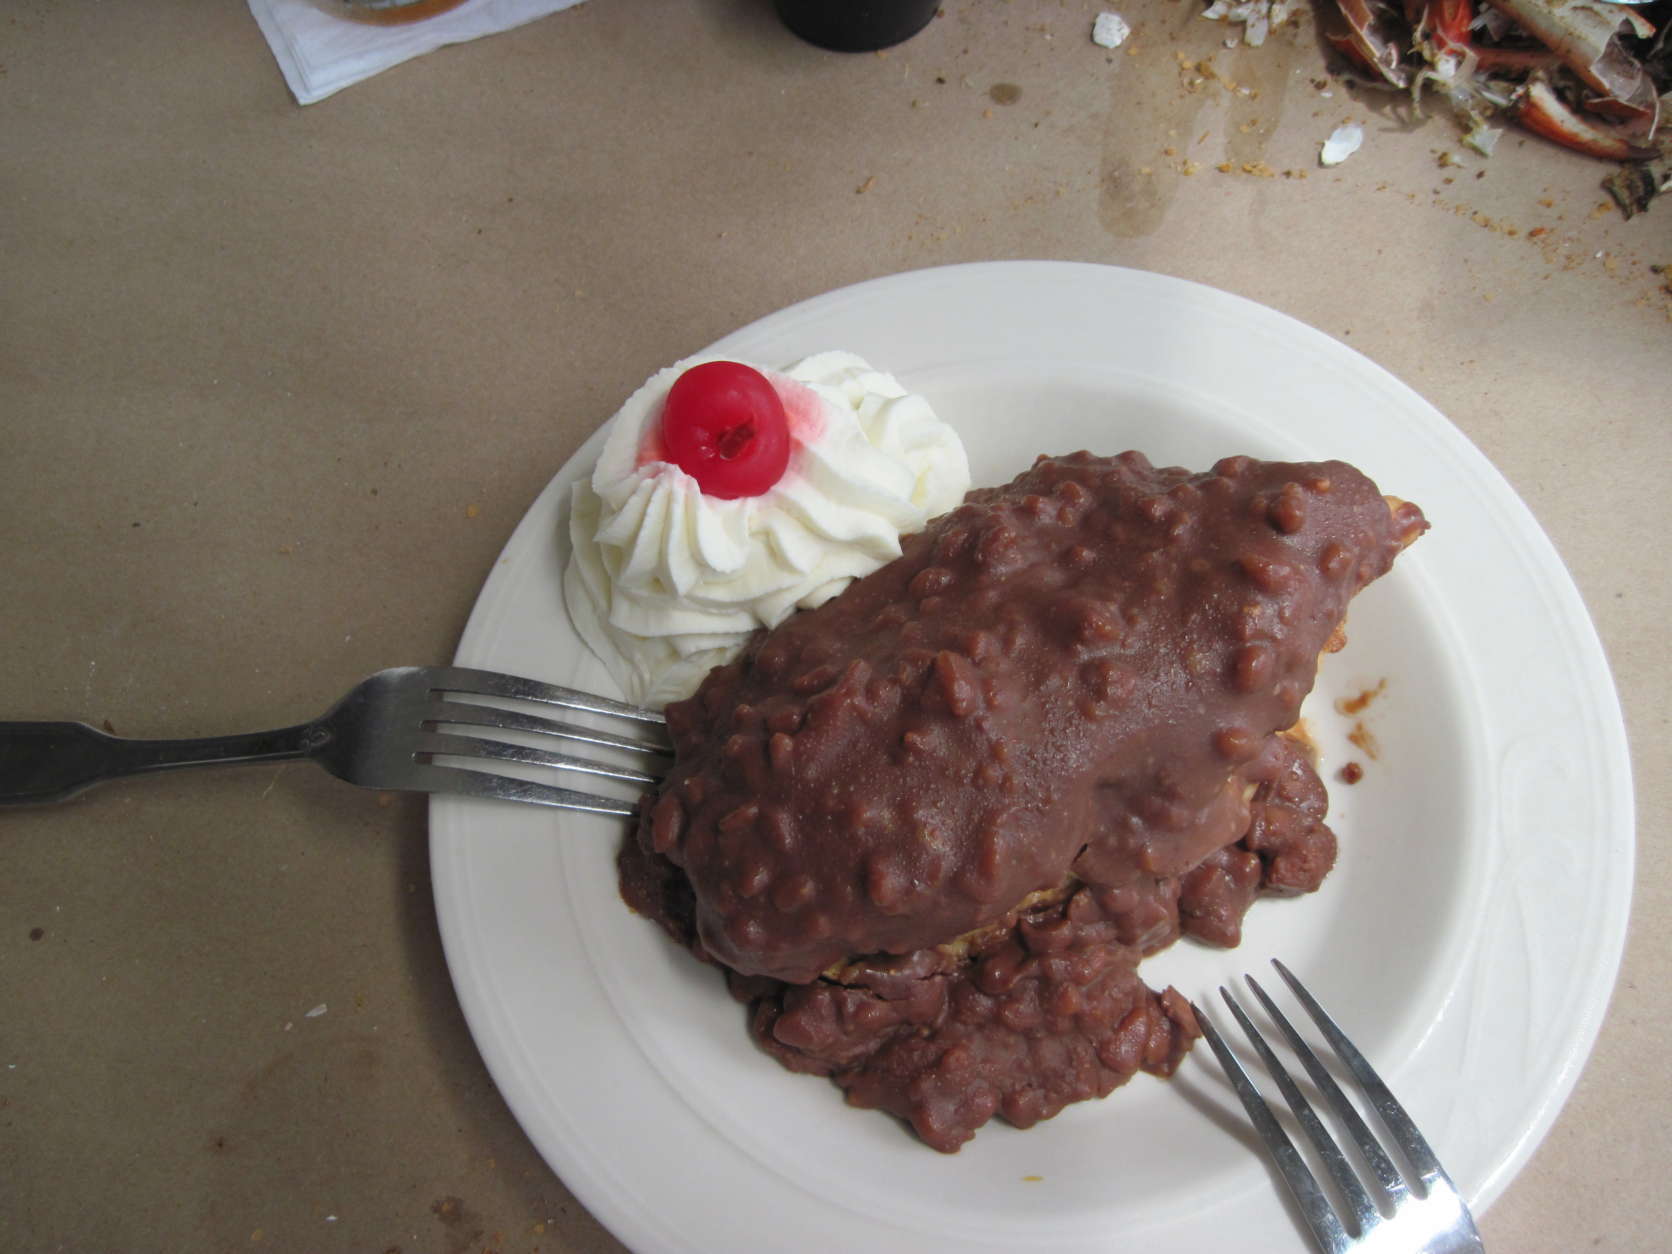 Save room for Suicide Bridge Restaurant's large, homemade chocolate éclair covered in frozen Heath Bar chocolate. This huge, creamy dessert came with whipped cream and a cherry on the side. (WTOP/Colleen Kelleher)